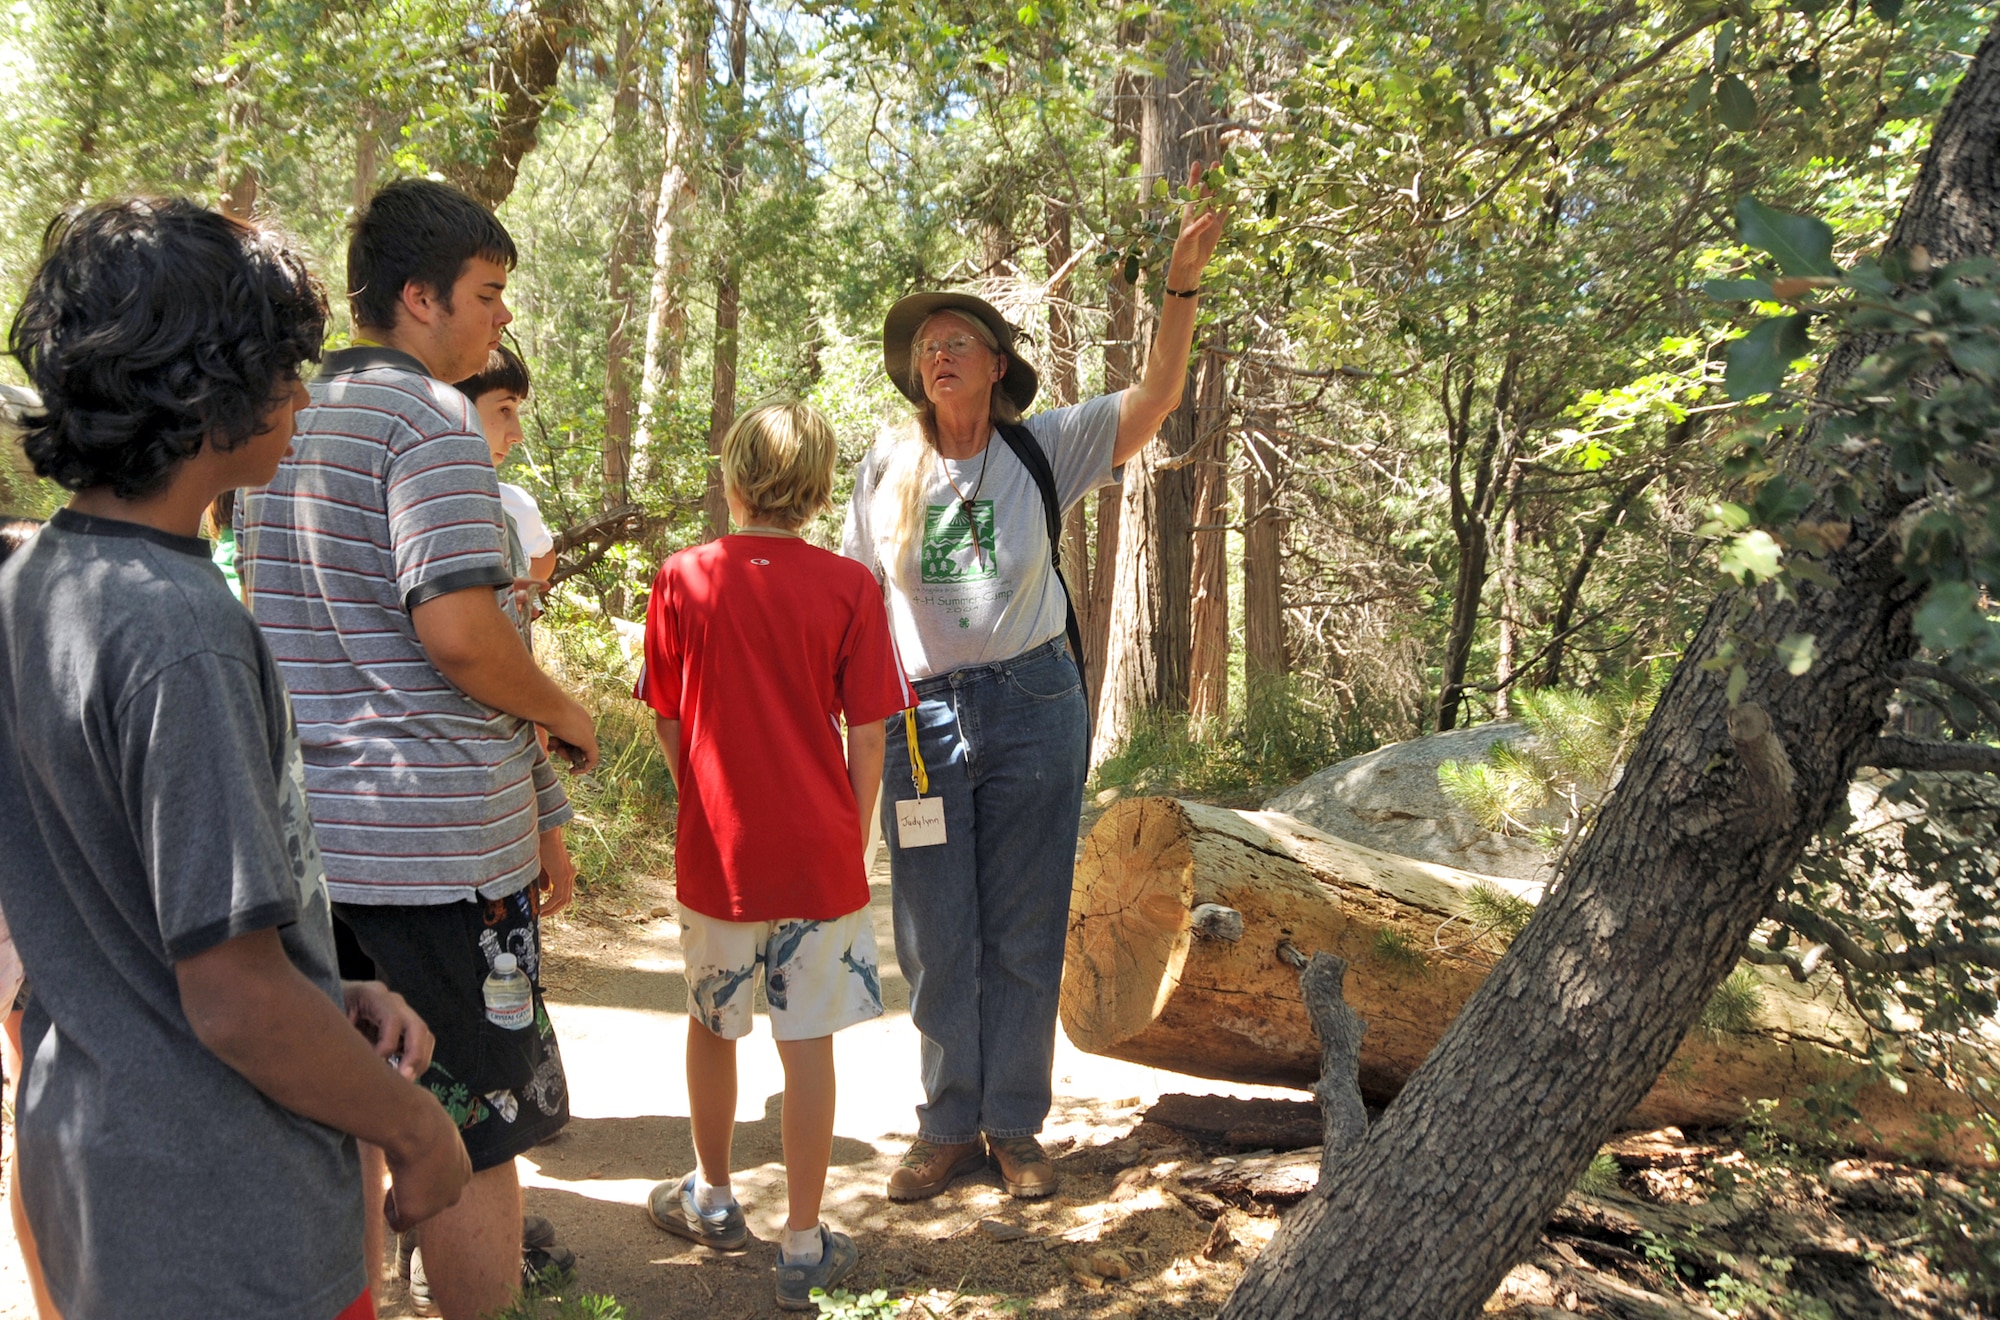 Judy Lynn Pelling, camp resource and nature counselor, leads 4-H campers on a nature hike to identify the area’s floral and fauna. (Photo by Joe Juarez)